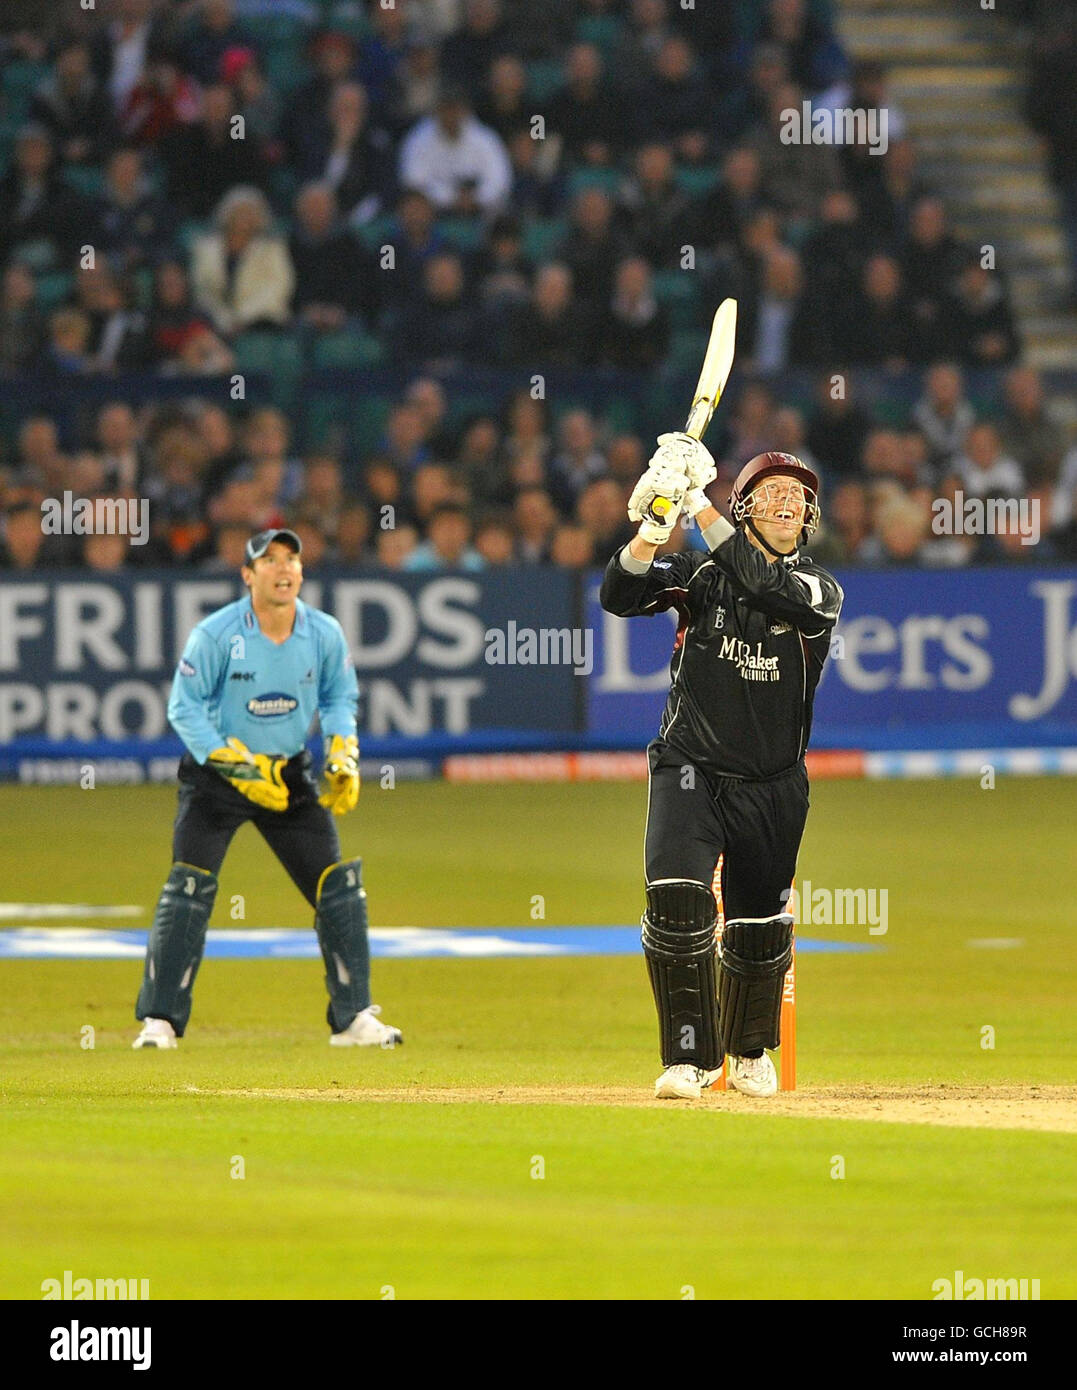 Cricket - Friends Provident T20 - Sussex v Somerset - County Ground Foto Stock